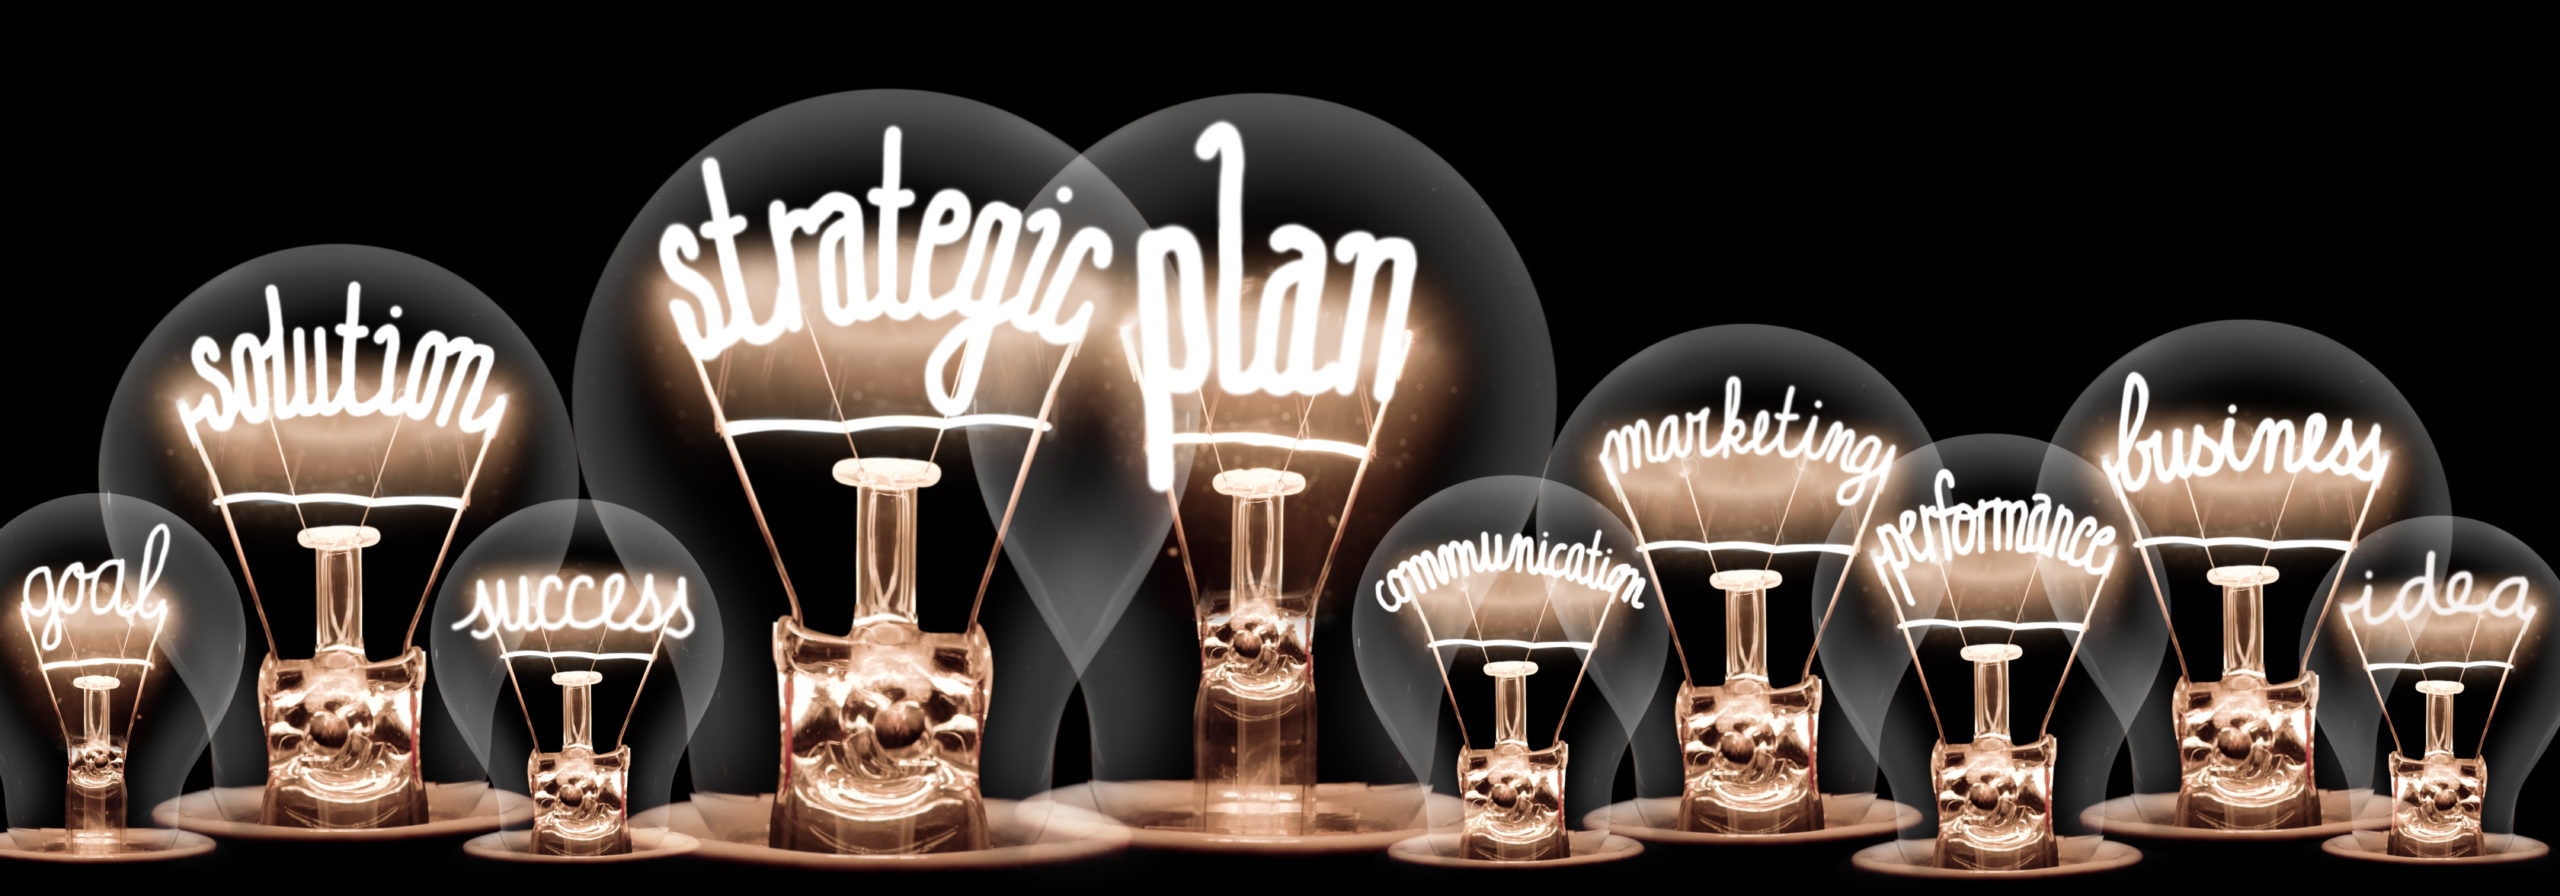 Group of light bulbs with shining fibers in a shape of Strategic Plan, Solution, Success and Idea concept related words isolated on black background